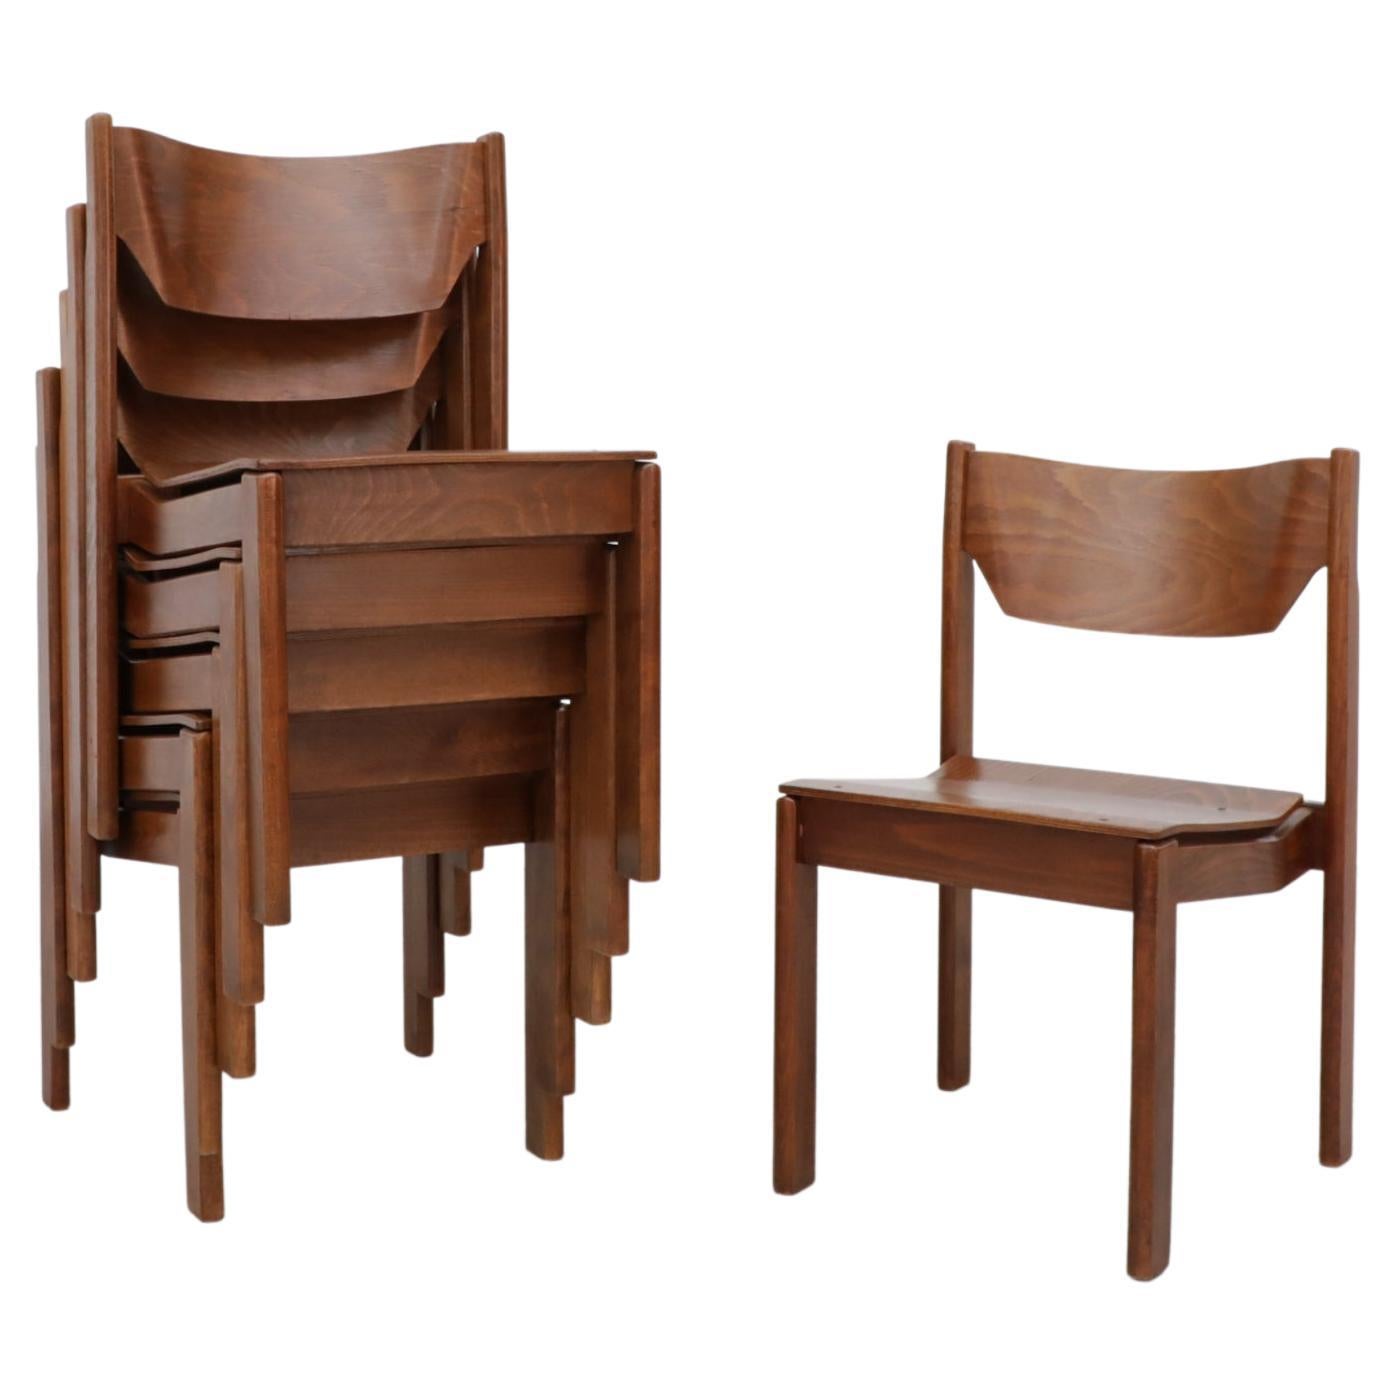 Sven Markelius Style Dark Stained Birch Stacking Chairs For Sale